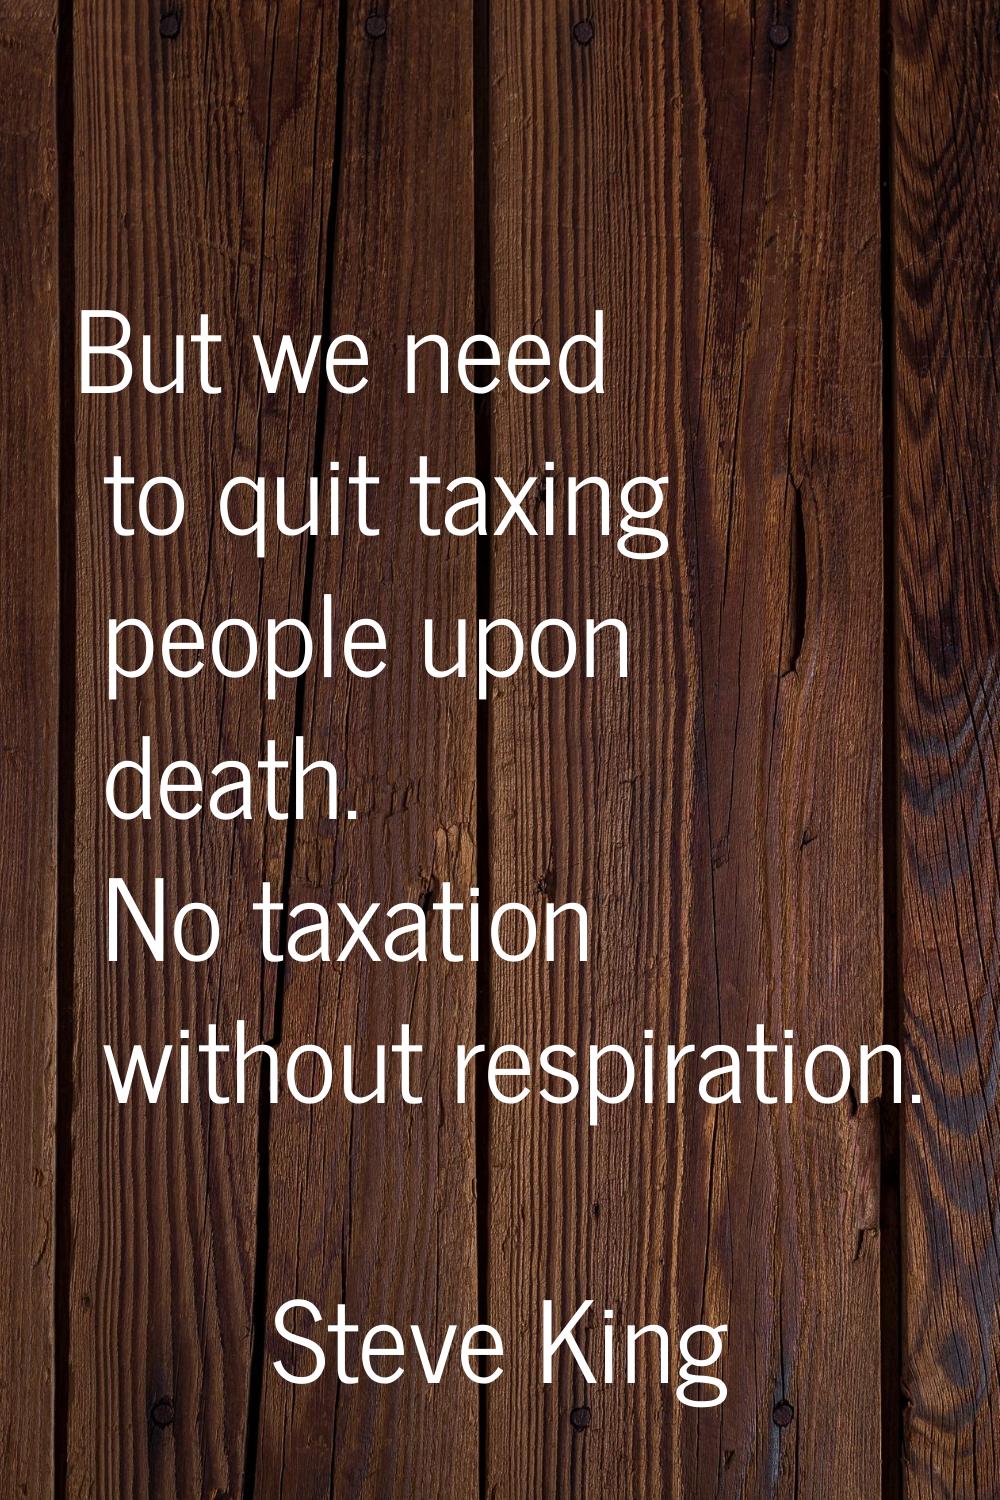 But we need to quit taxing people upon death. No taxation without respiration.